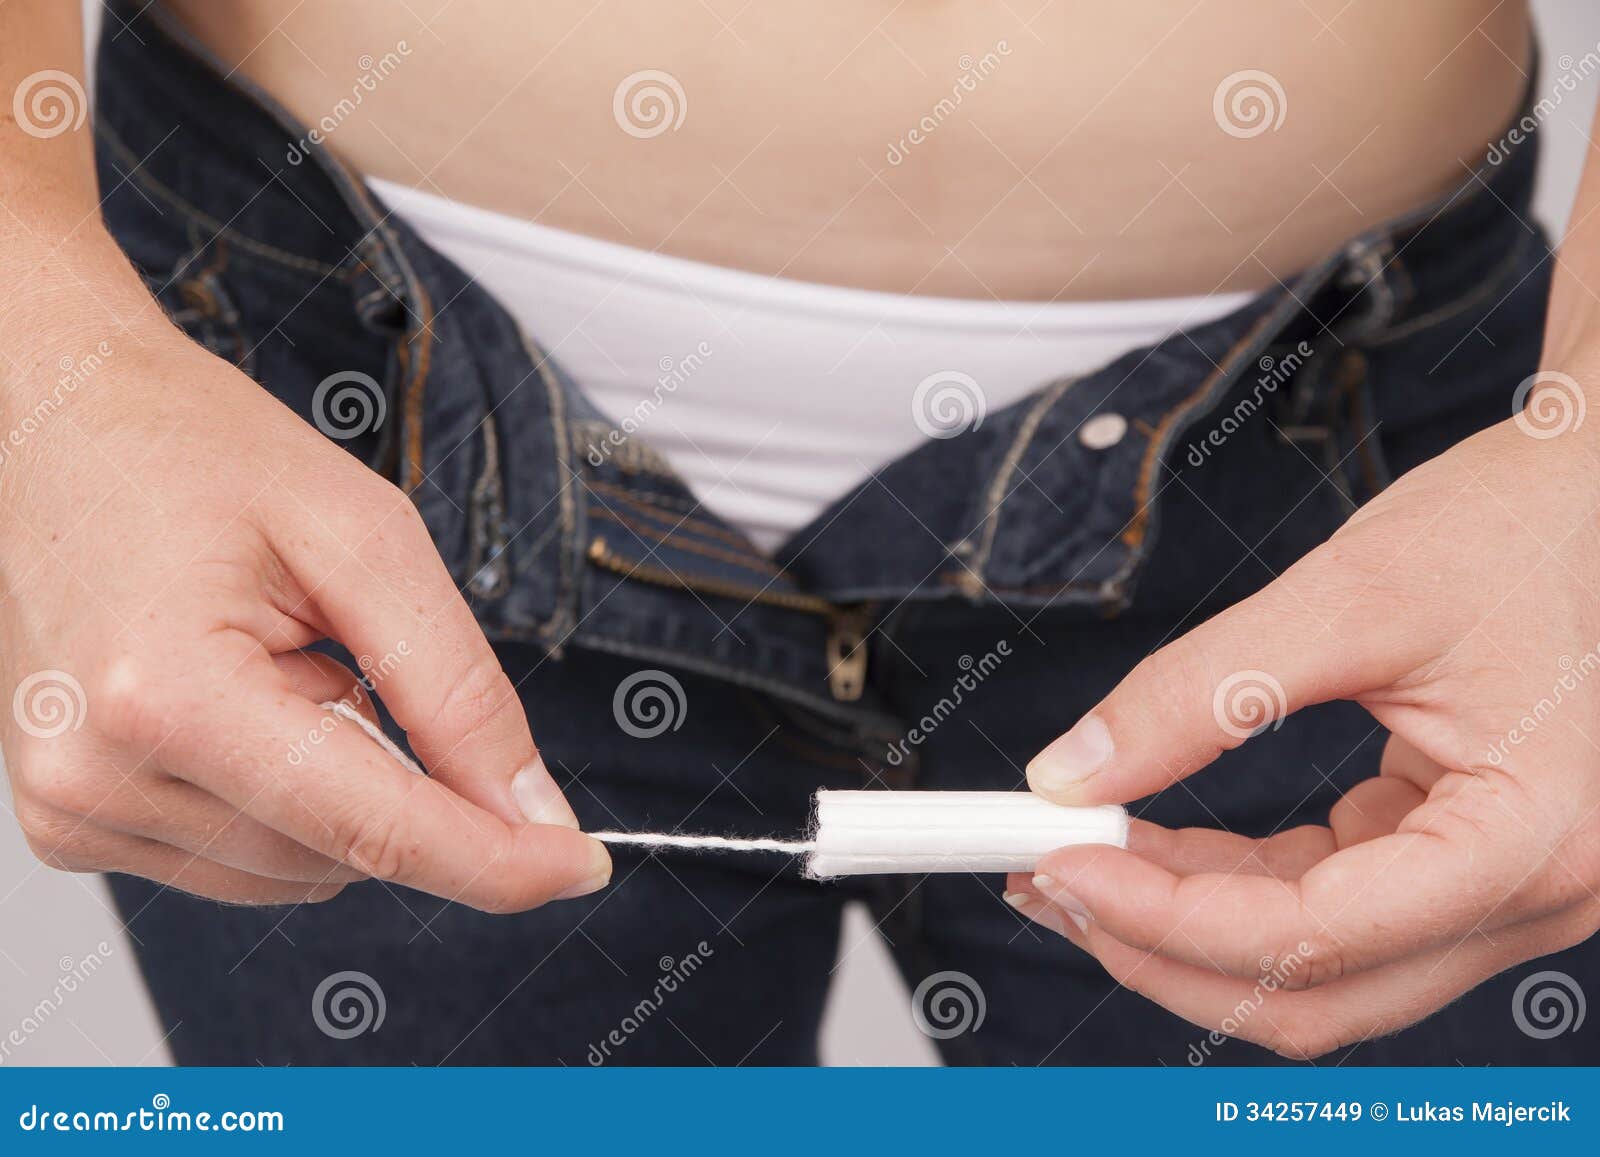 young woman preparing for menstruation